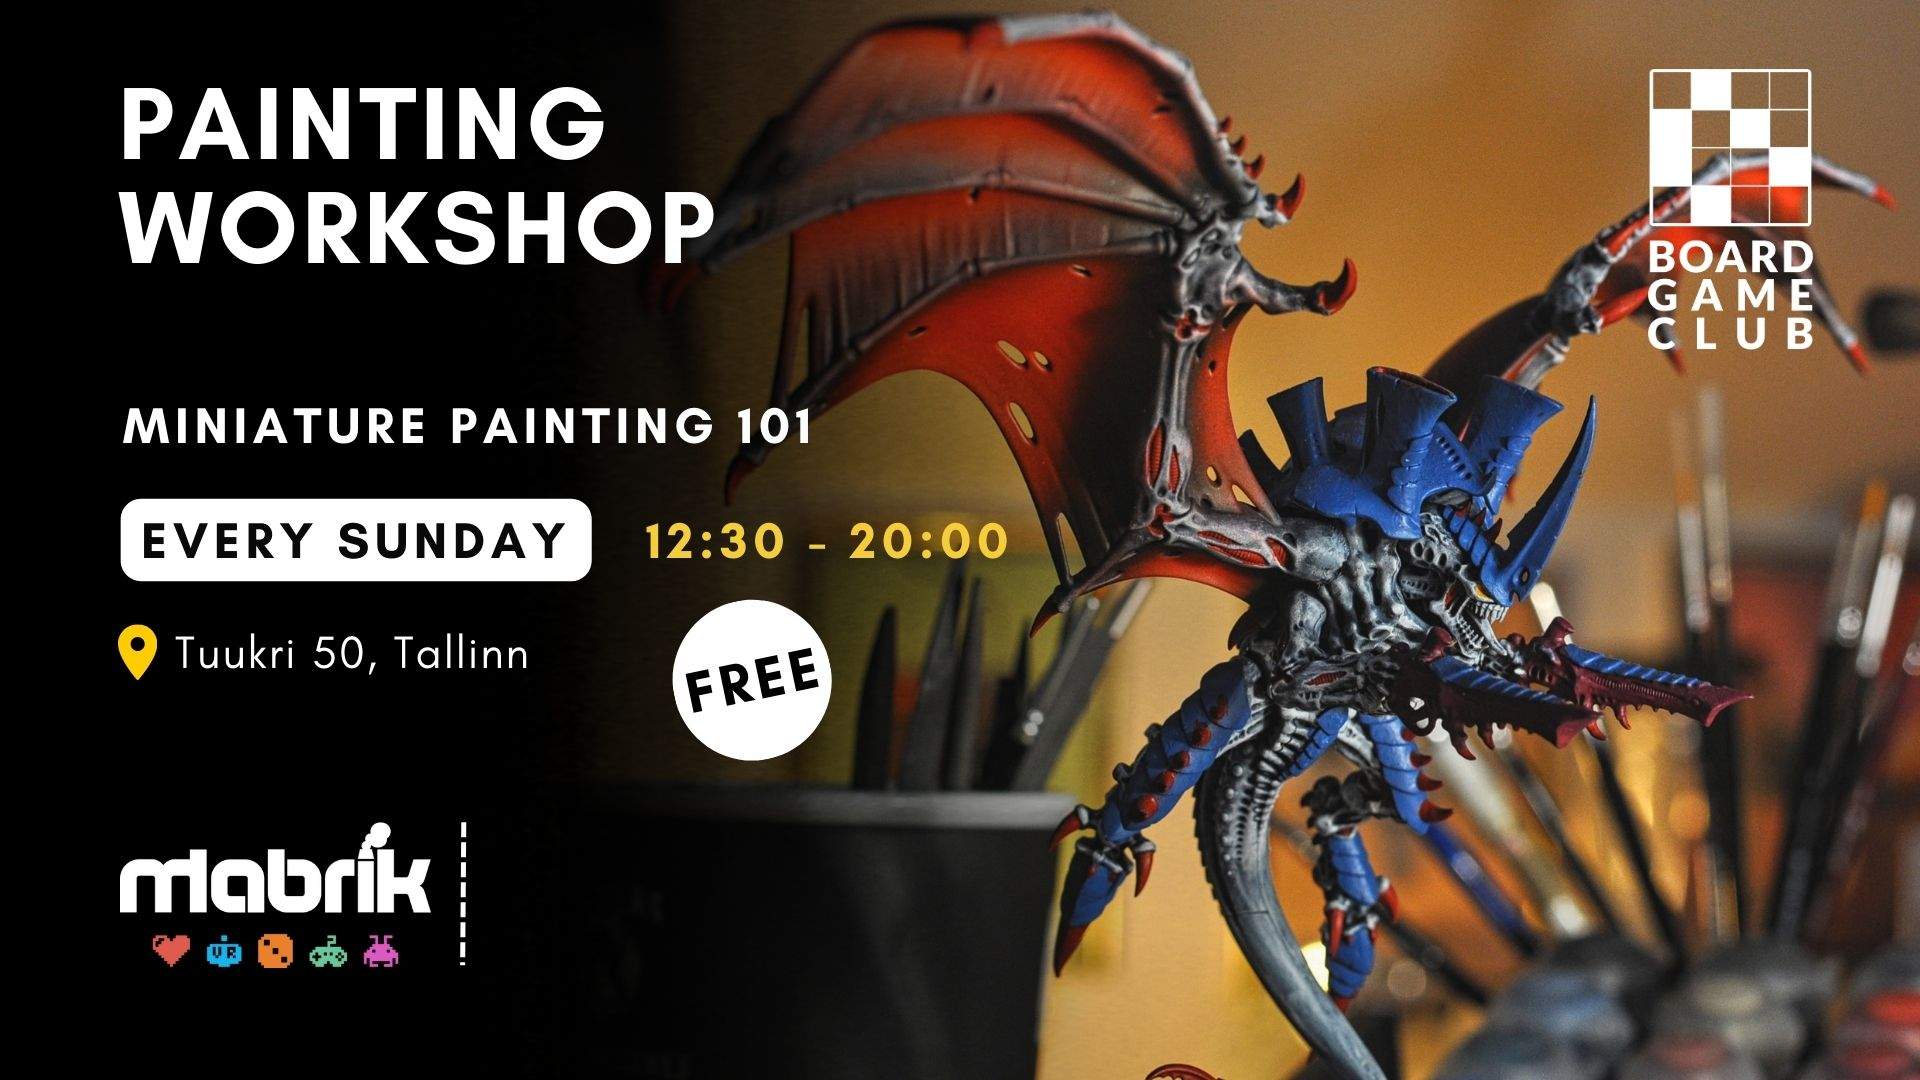 Events - Every Sunday - Painting Workshop